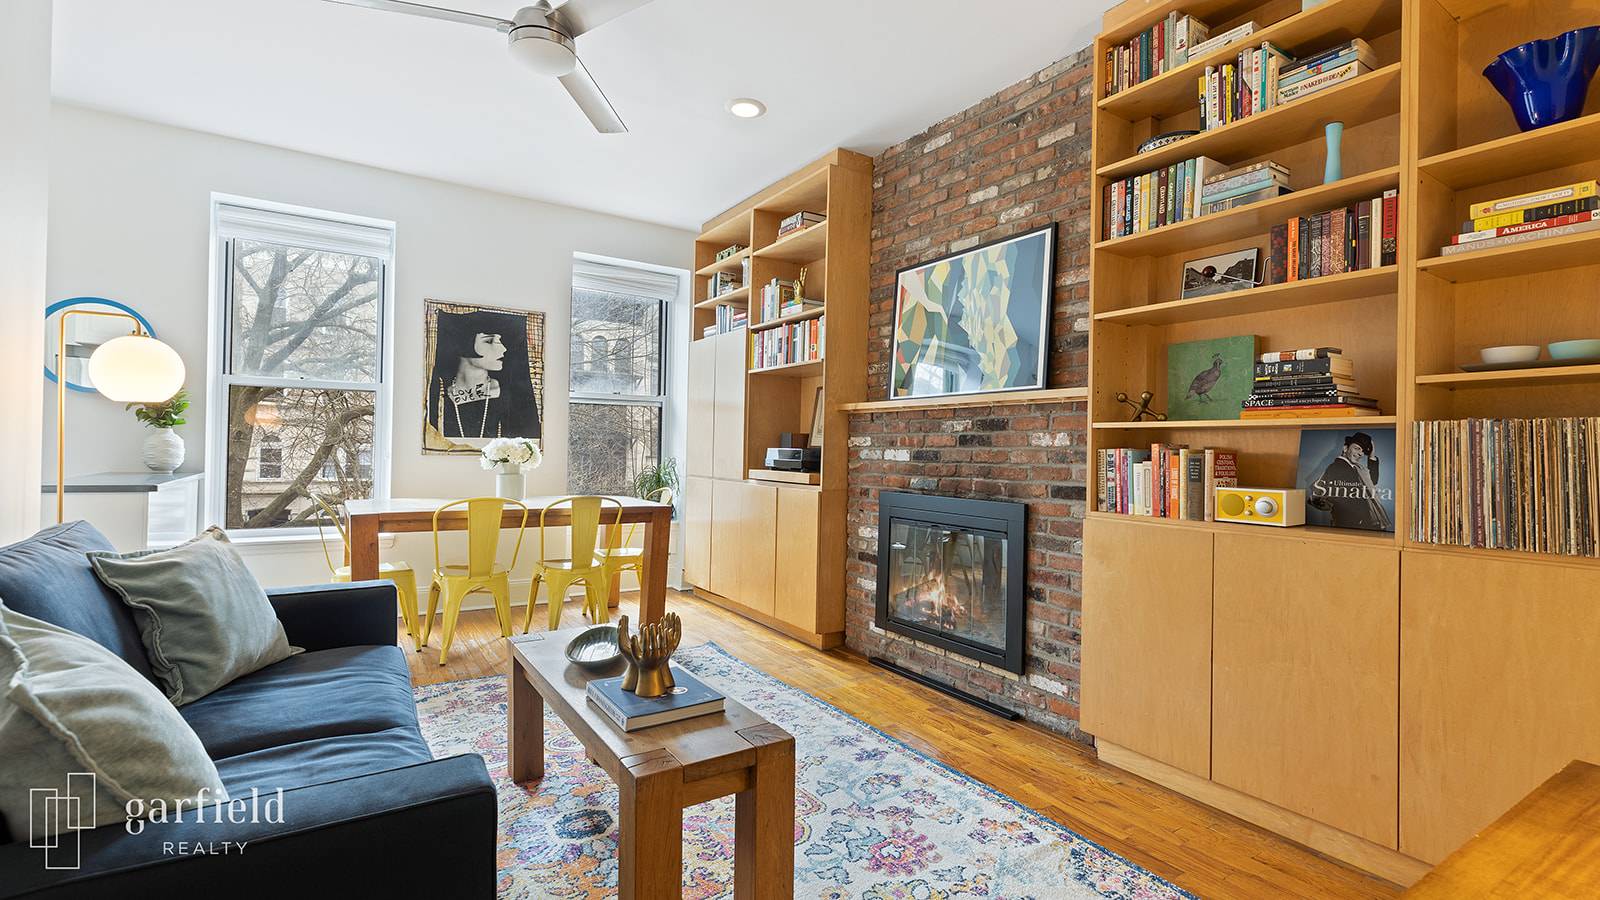 Occupying the entire second floor of a boutique 4 unit brownstone on premier 3rd Street in the heart of Park Slope, this renovated 2BR home is kissed with natural sunlight ...